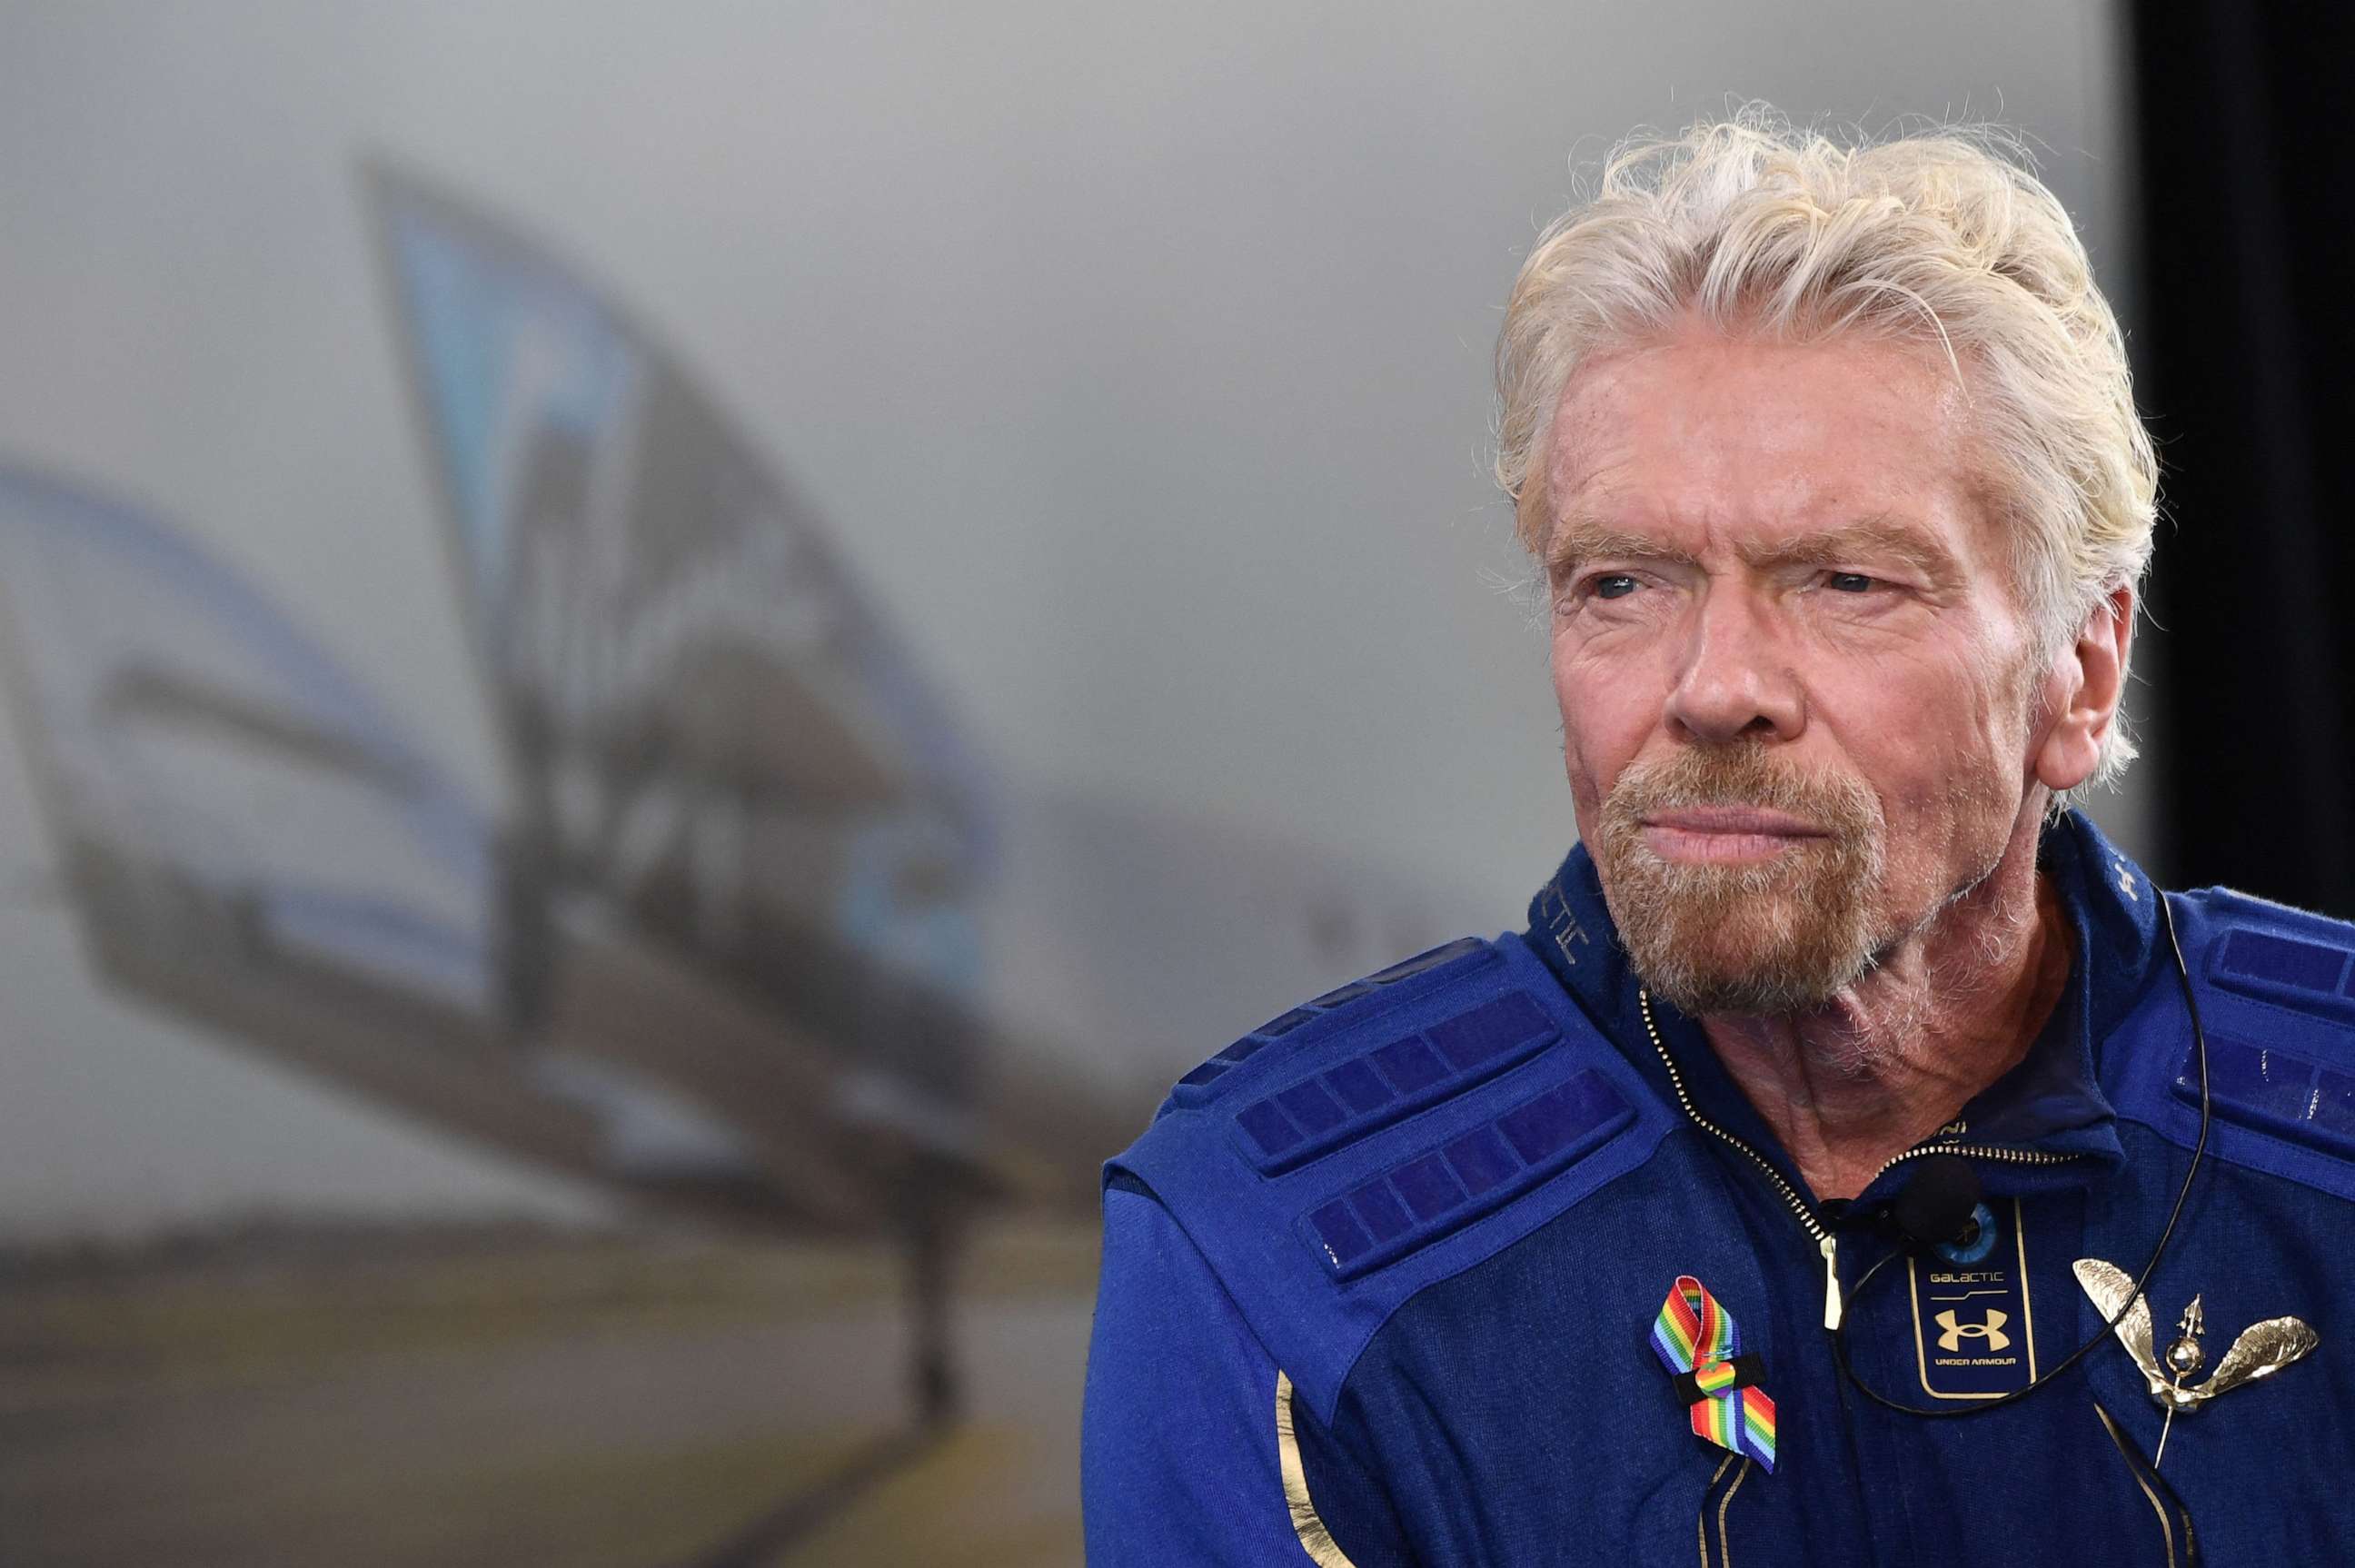 PHOTO: In this July 11, 2021, file photo, Sir Richard Branson speaks after he flew into space aboard a Virgin Galactic vessel, near Truth and Consequences, New Mexico.